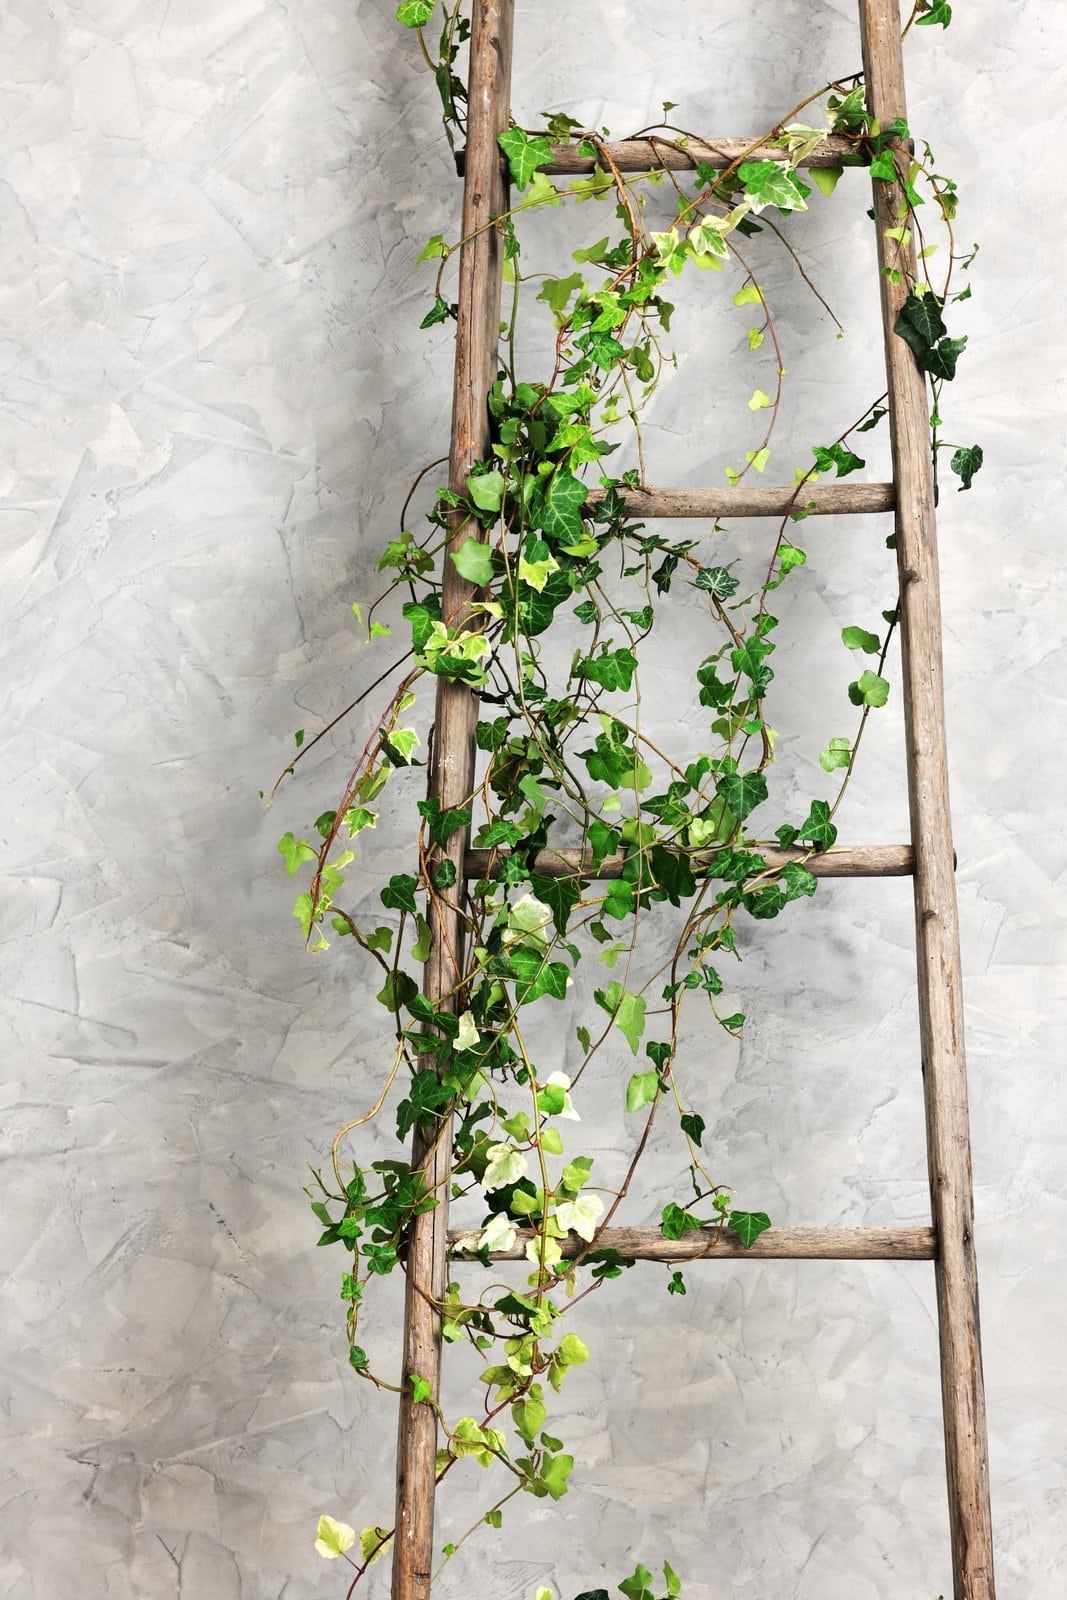 Rustic old wooden ladder with trailing ivy